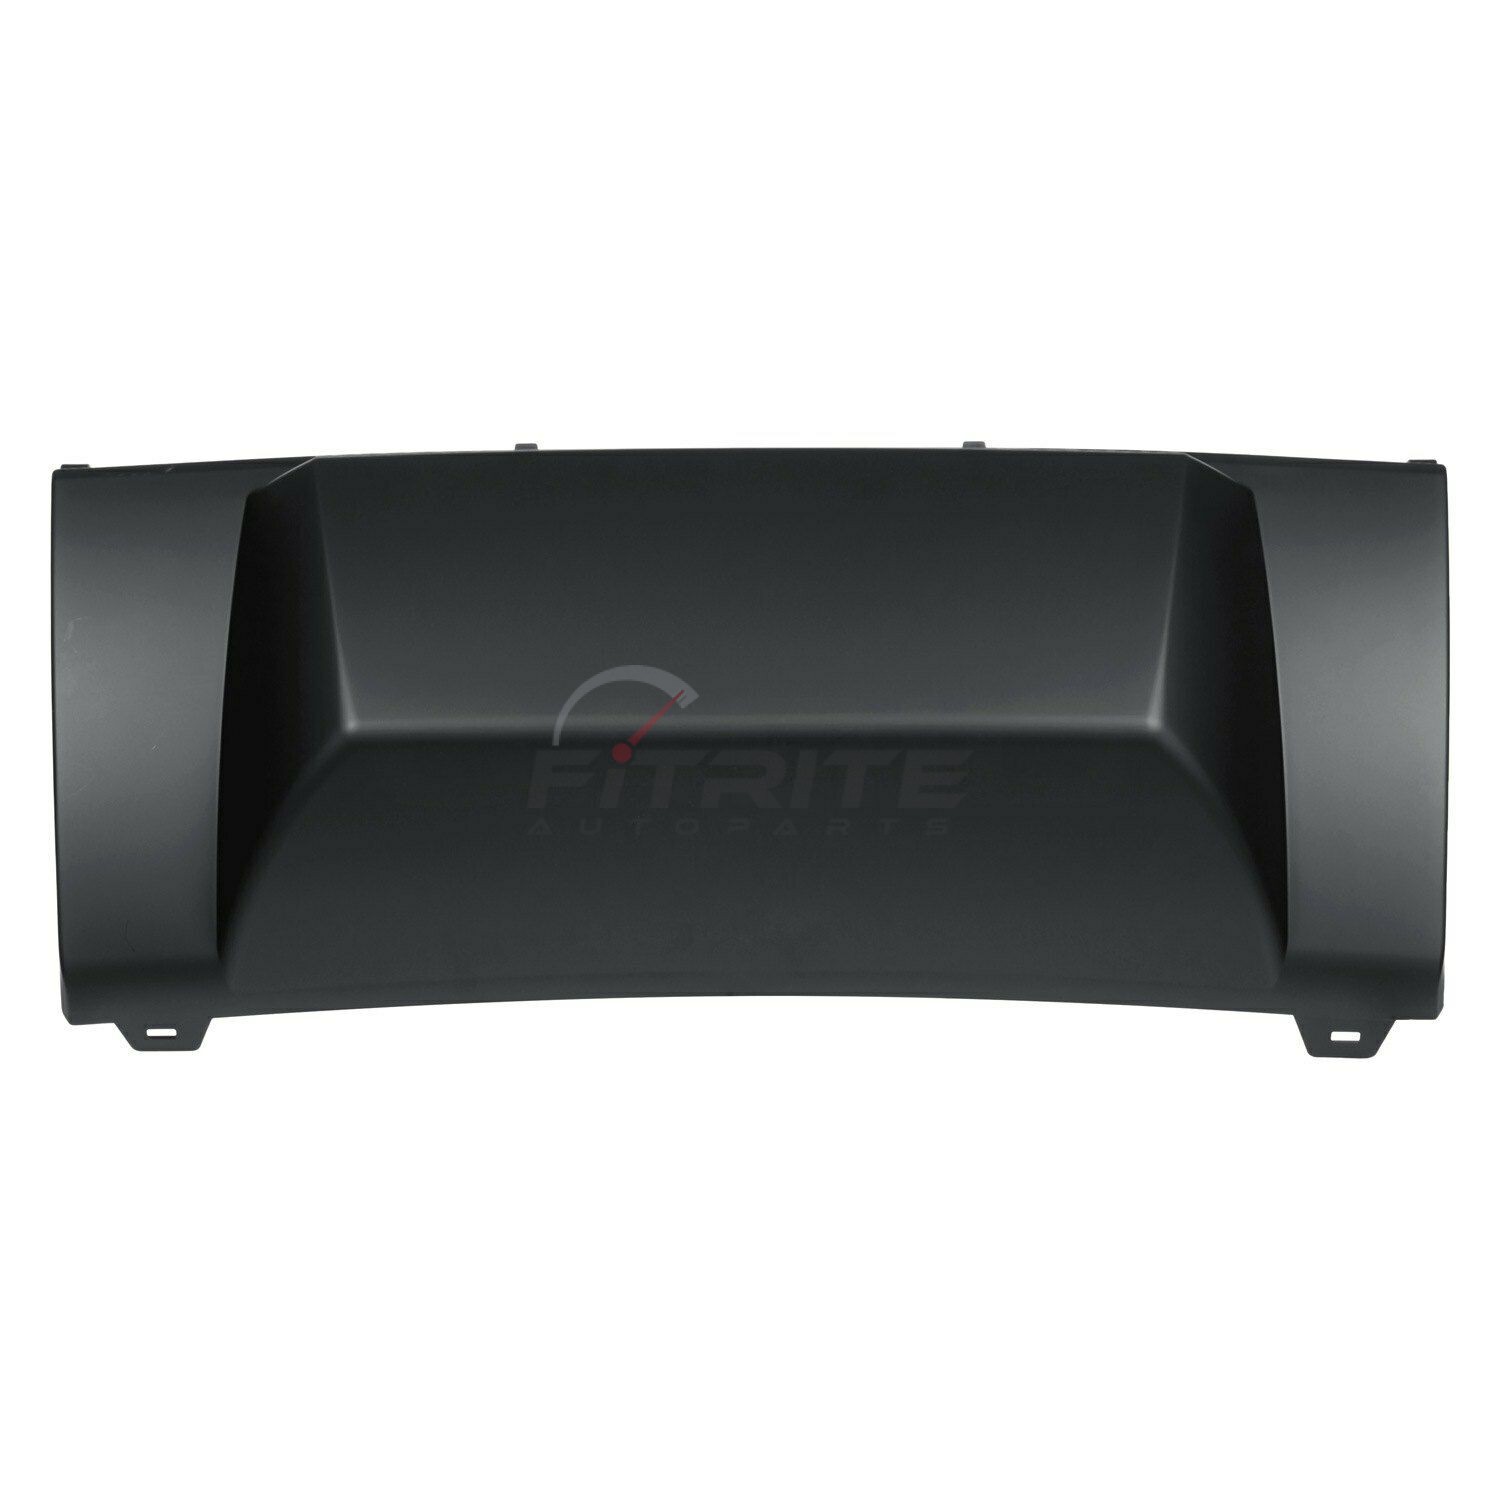 New Rear Bumper Tow Hitch Hole Cover For 2007-2014 Cadillac Escalade GM1129106 | eBay 2007 Cadillac Escalade Tow Hitch Bumper Cover